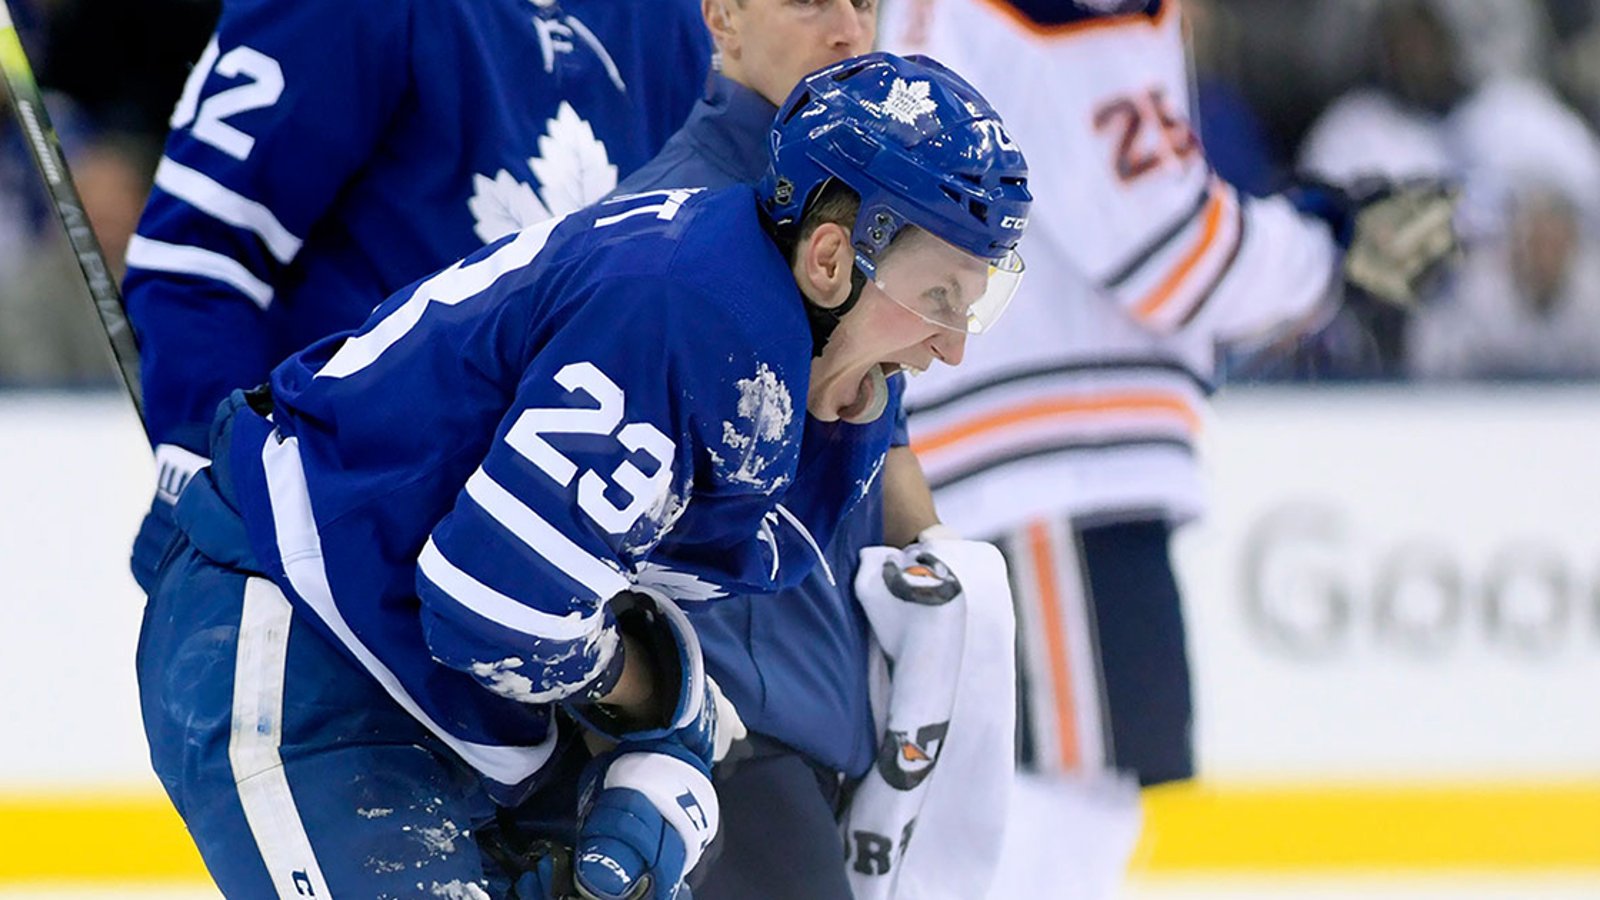 Breaking: Leafs confirm Dermott injury, will be out even longer than expected